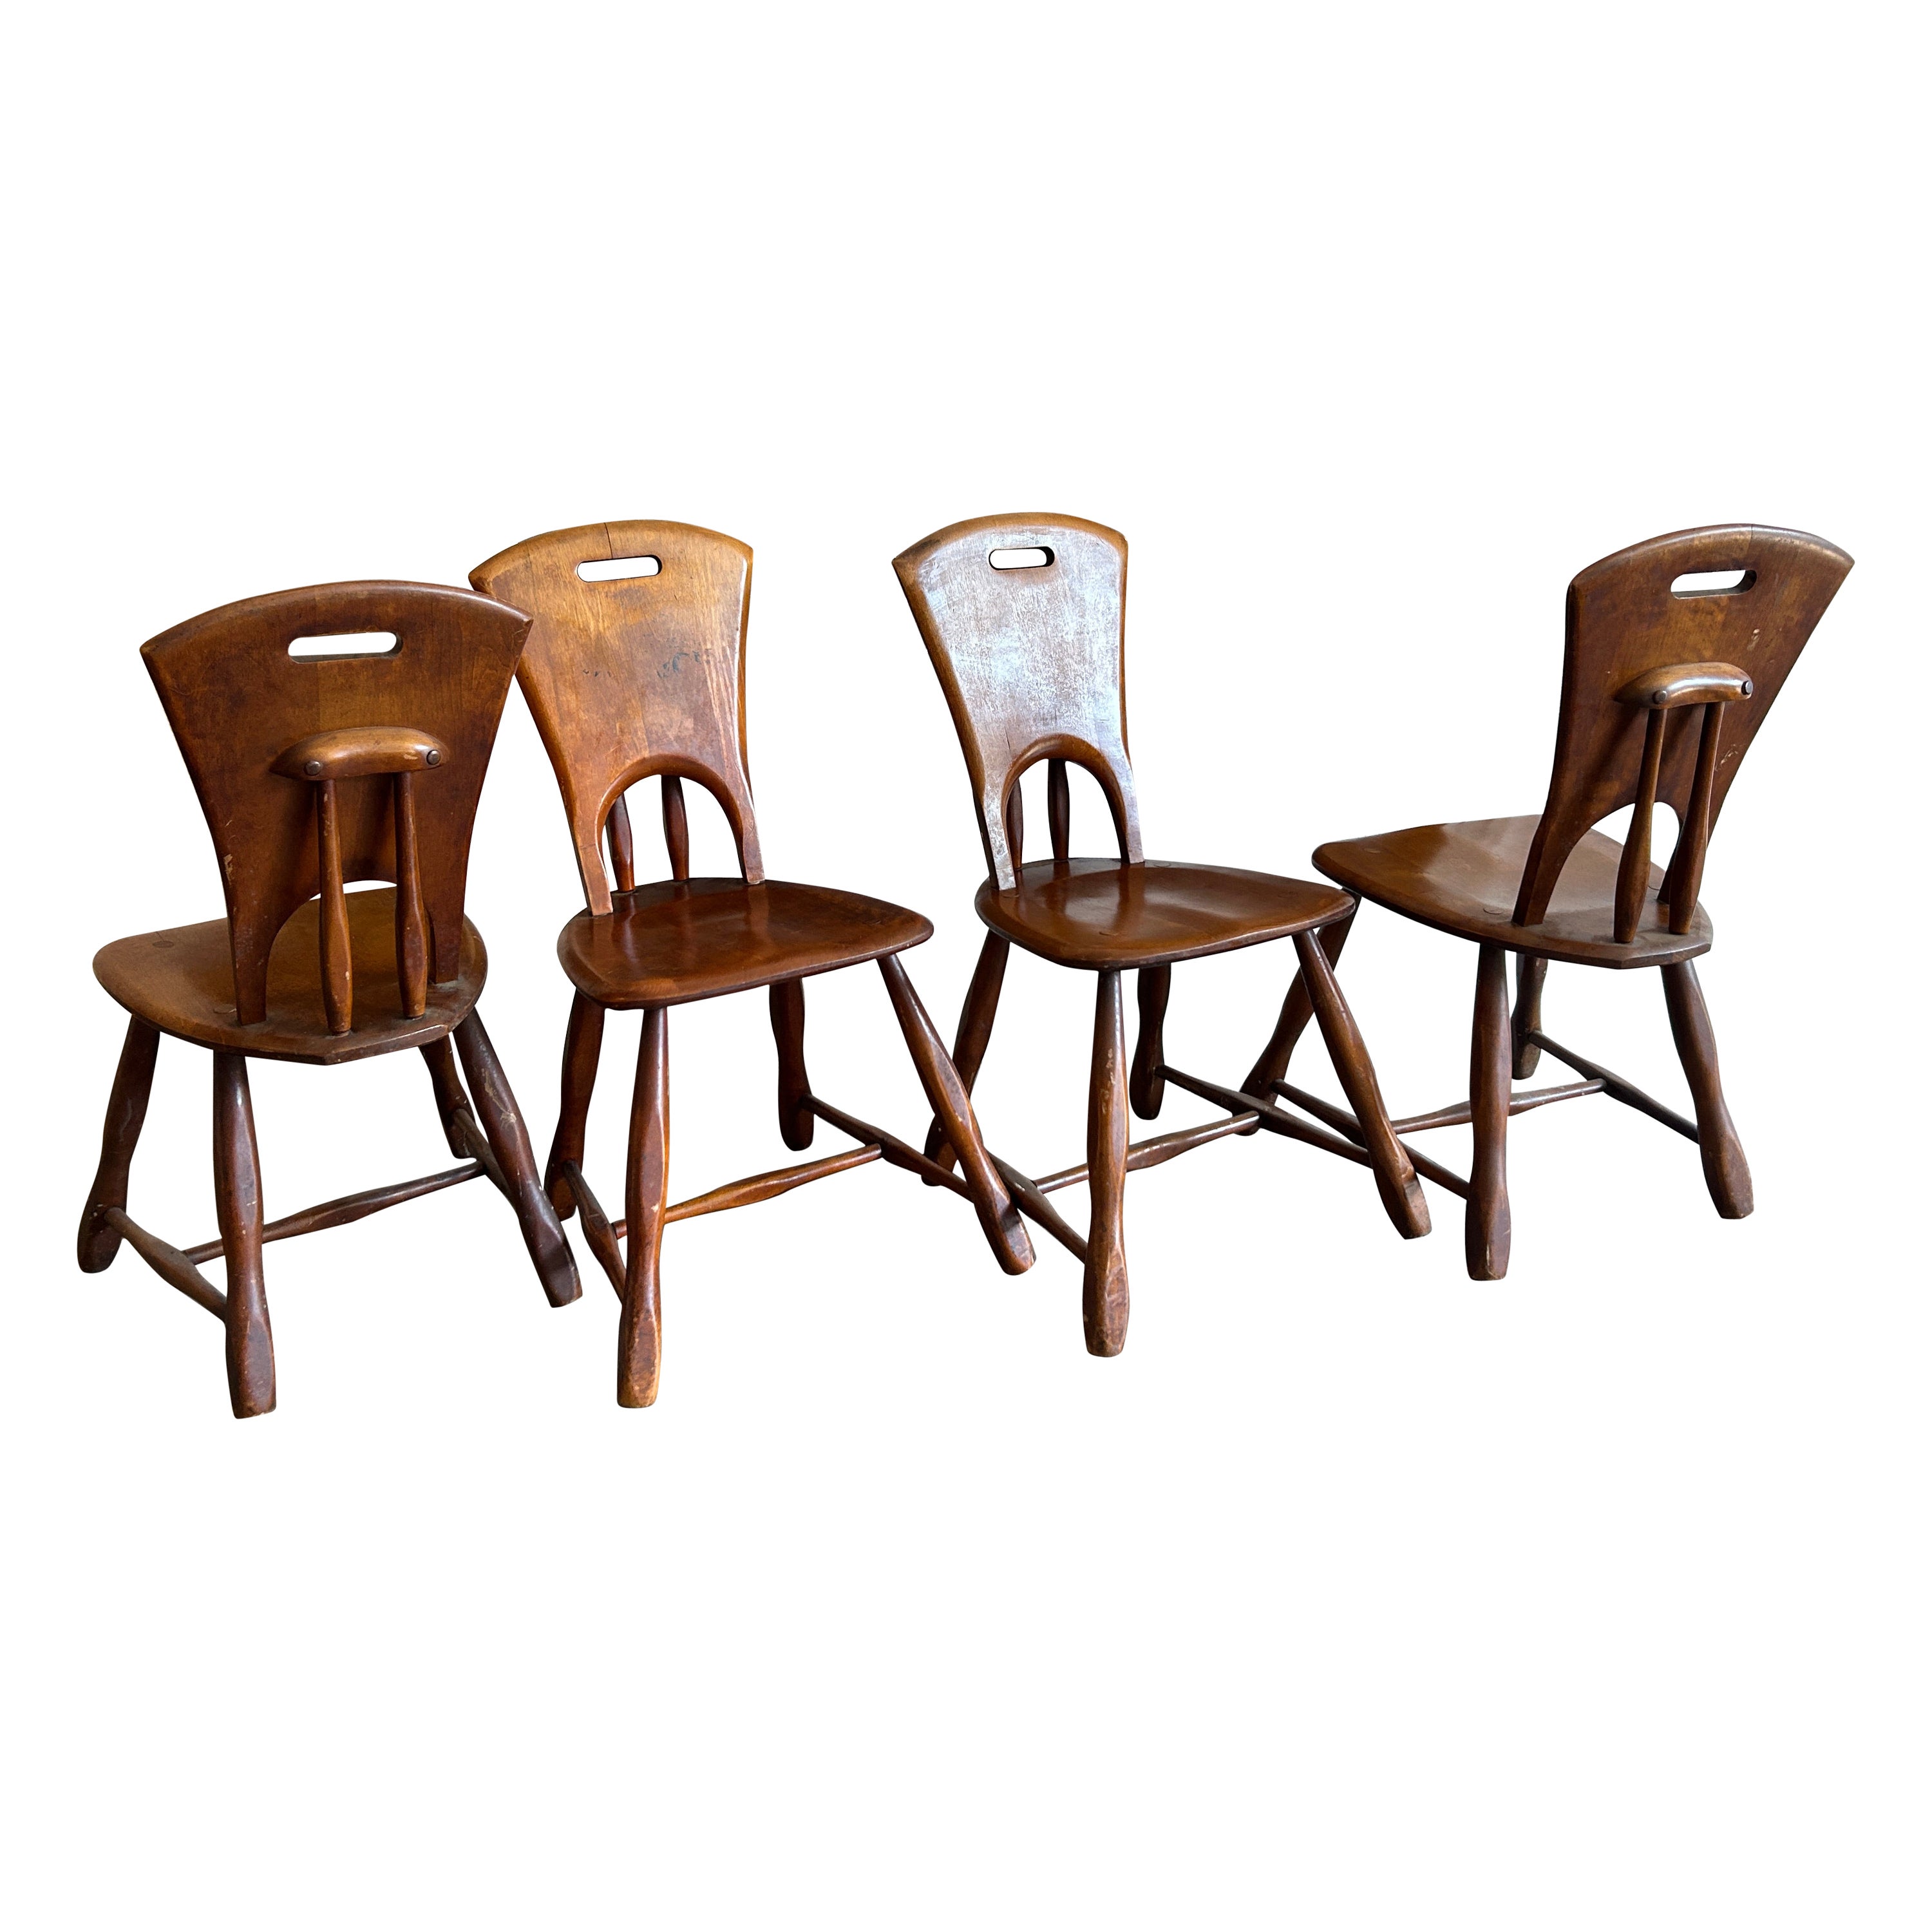 Set of 4 Mid-Century Modern Solid Wood Sculptural Craft Rustic Dining Chairs For Sale